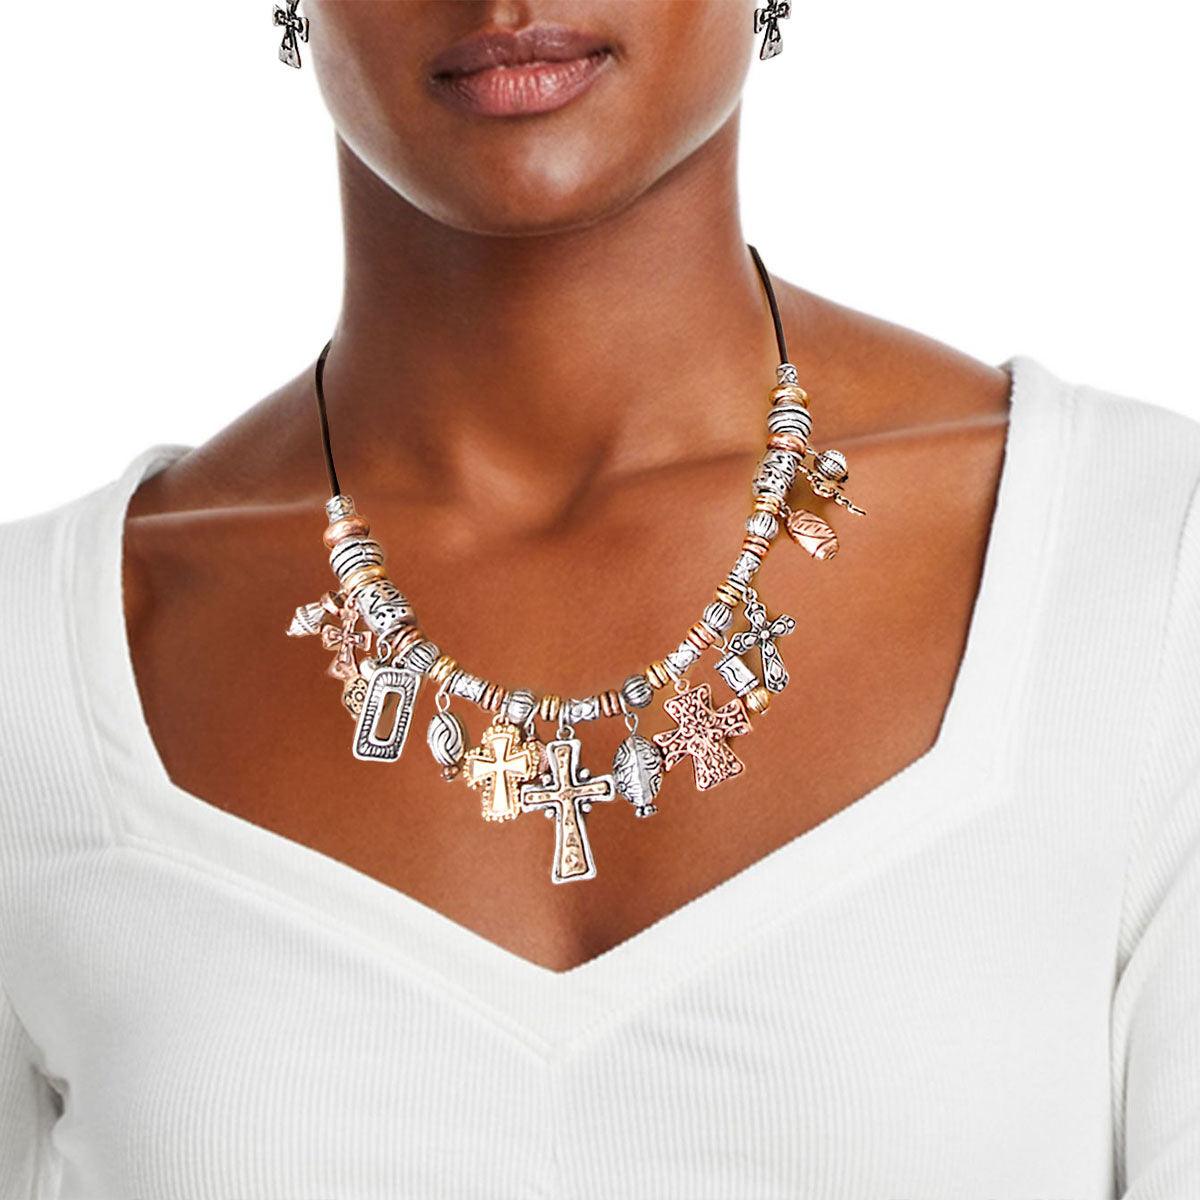 Affordable Mixed Metal Charm Bead Necklace Set: Complete Your Look Today